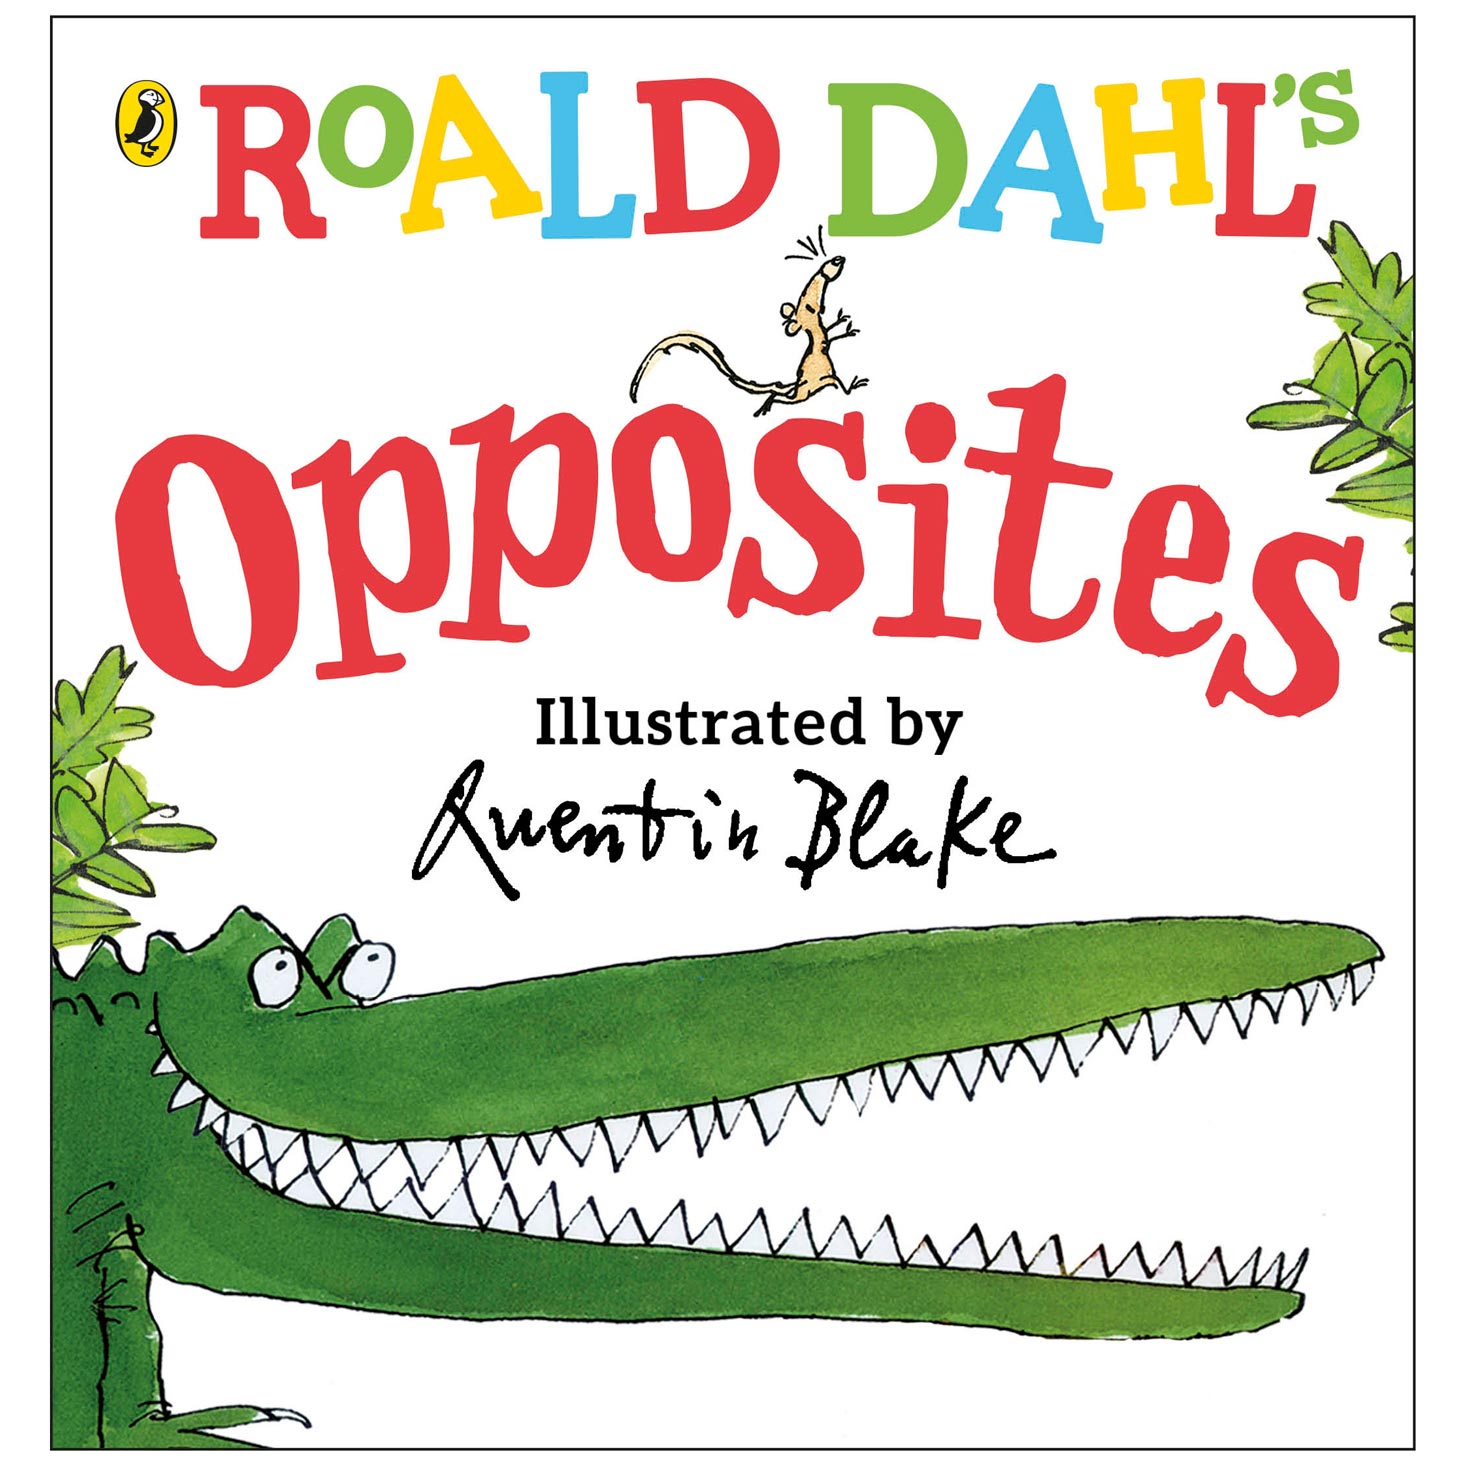 Roald Dahl's Opposites, a board book for toddlers